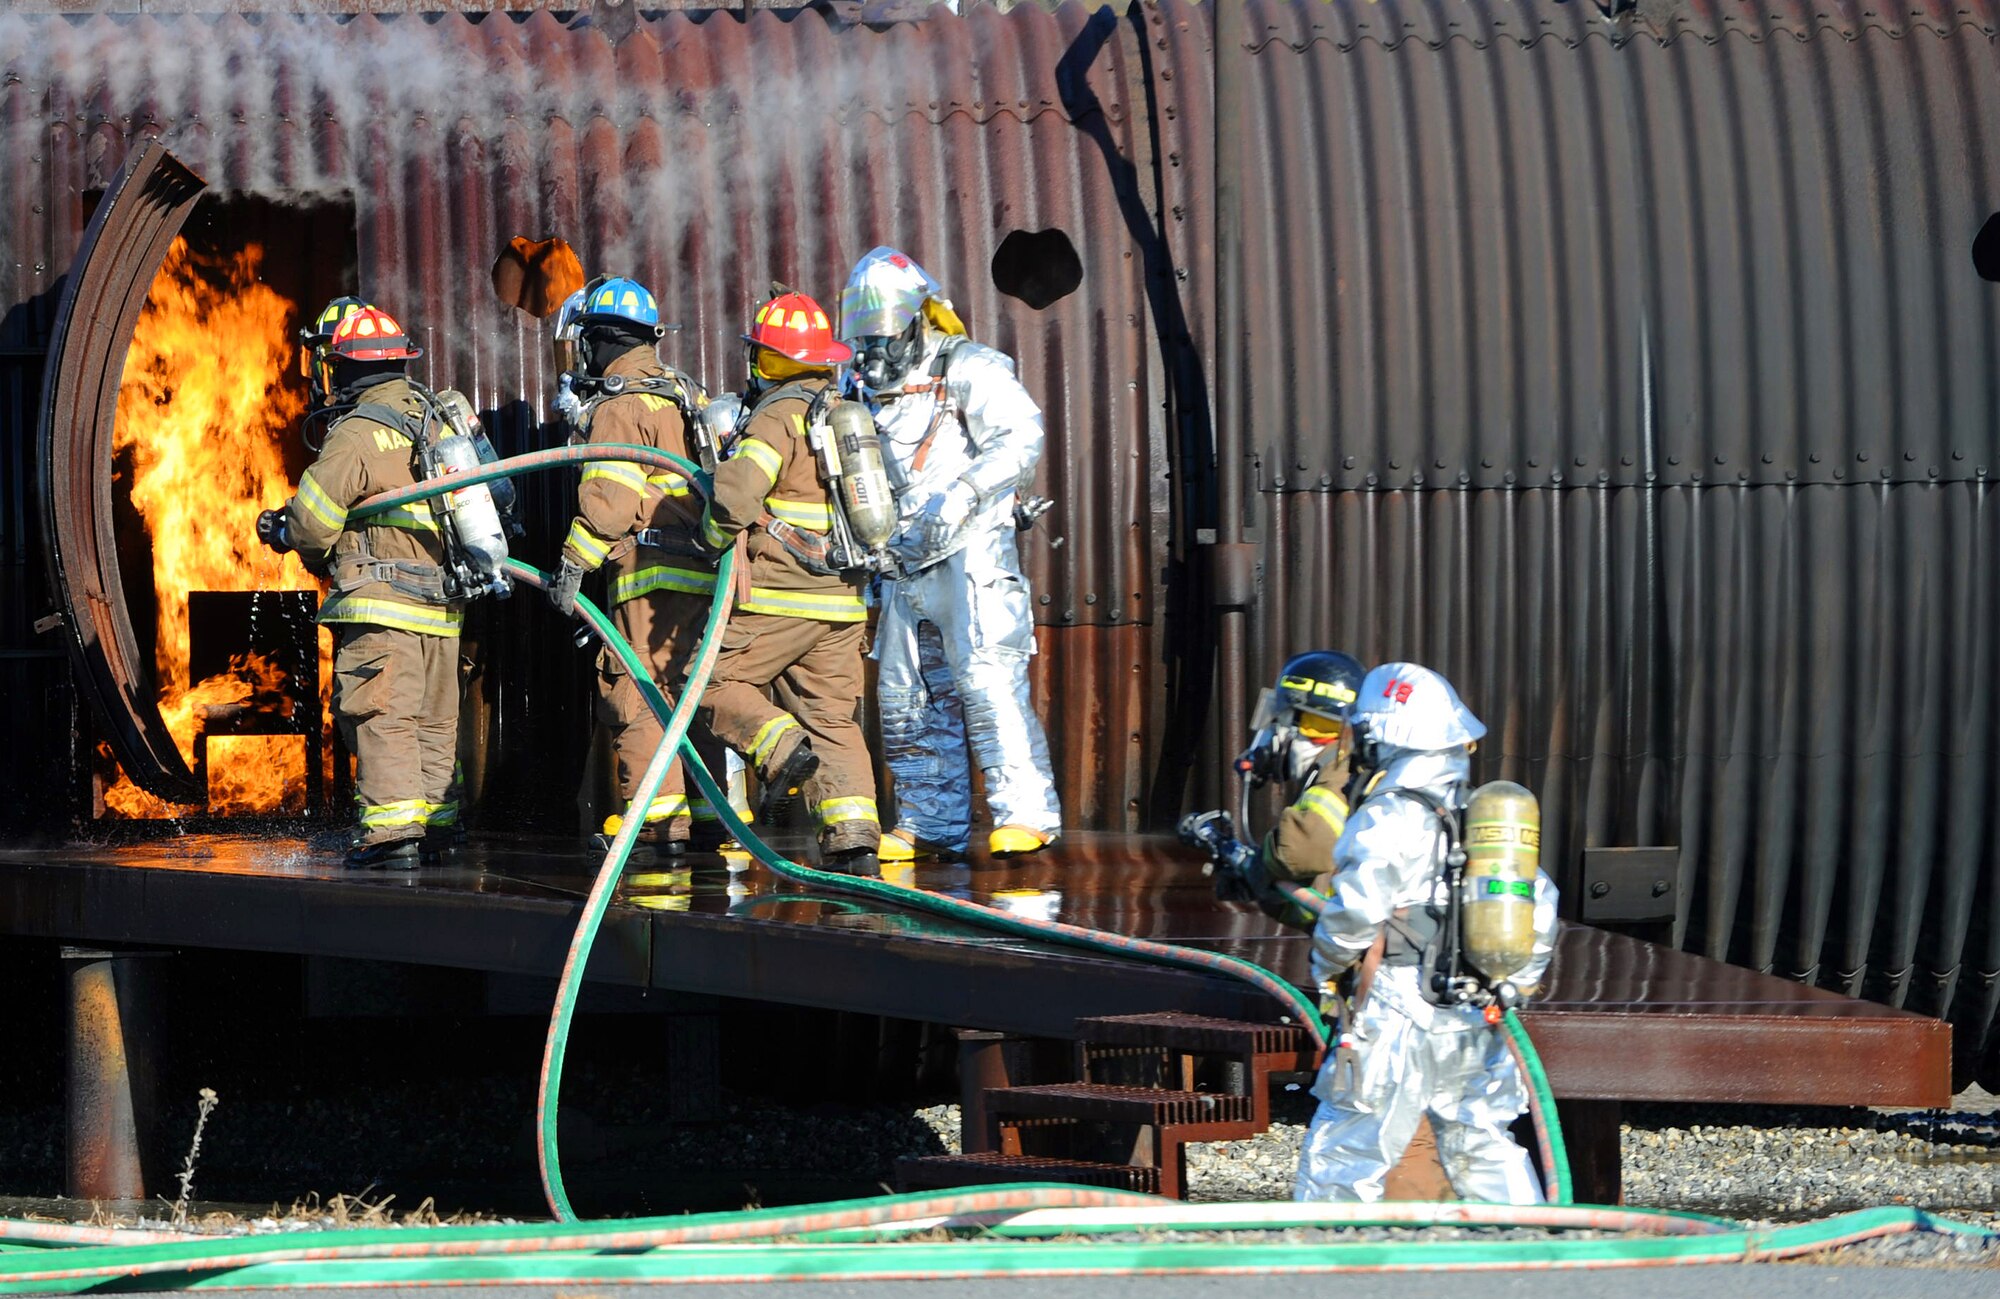 Fire firefighters work to suppress a simulated interior fire on a mock C-17 aircraft during a joint training session between Macon-Bibb County and Robins Air Force Base Fire Departments Wednesday. The training helps firefighters maintain their accreditation and provides an opportunity for members of both departments to build valuable working relationships. (U.S. Air Force photo by Tommie Horton)